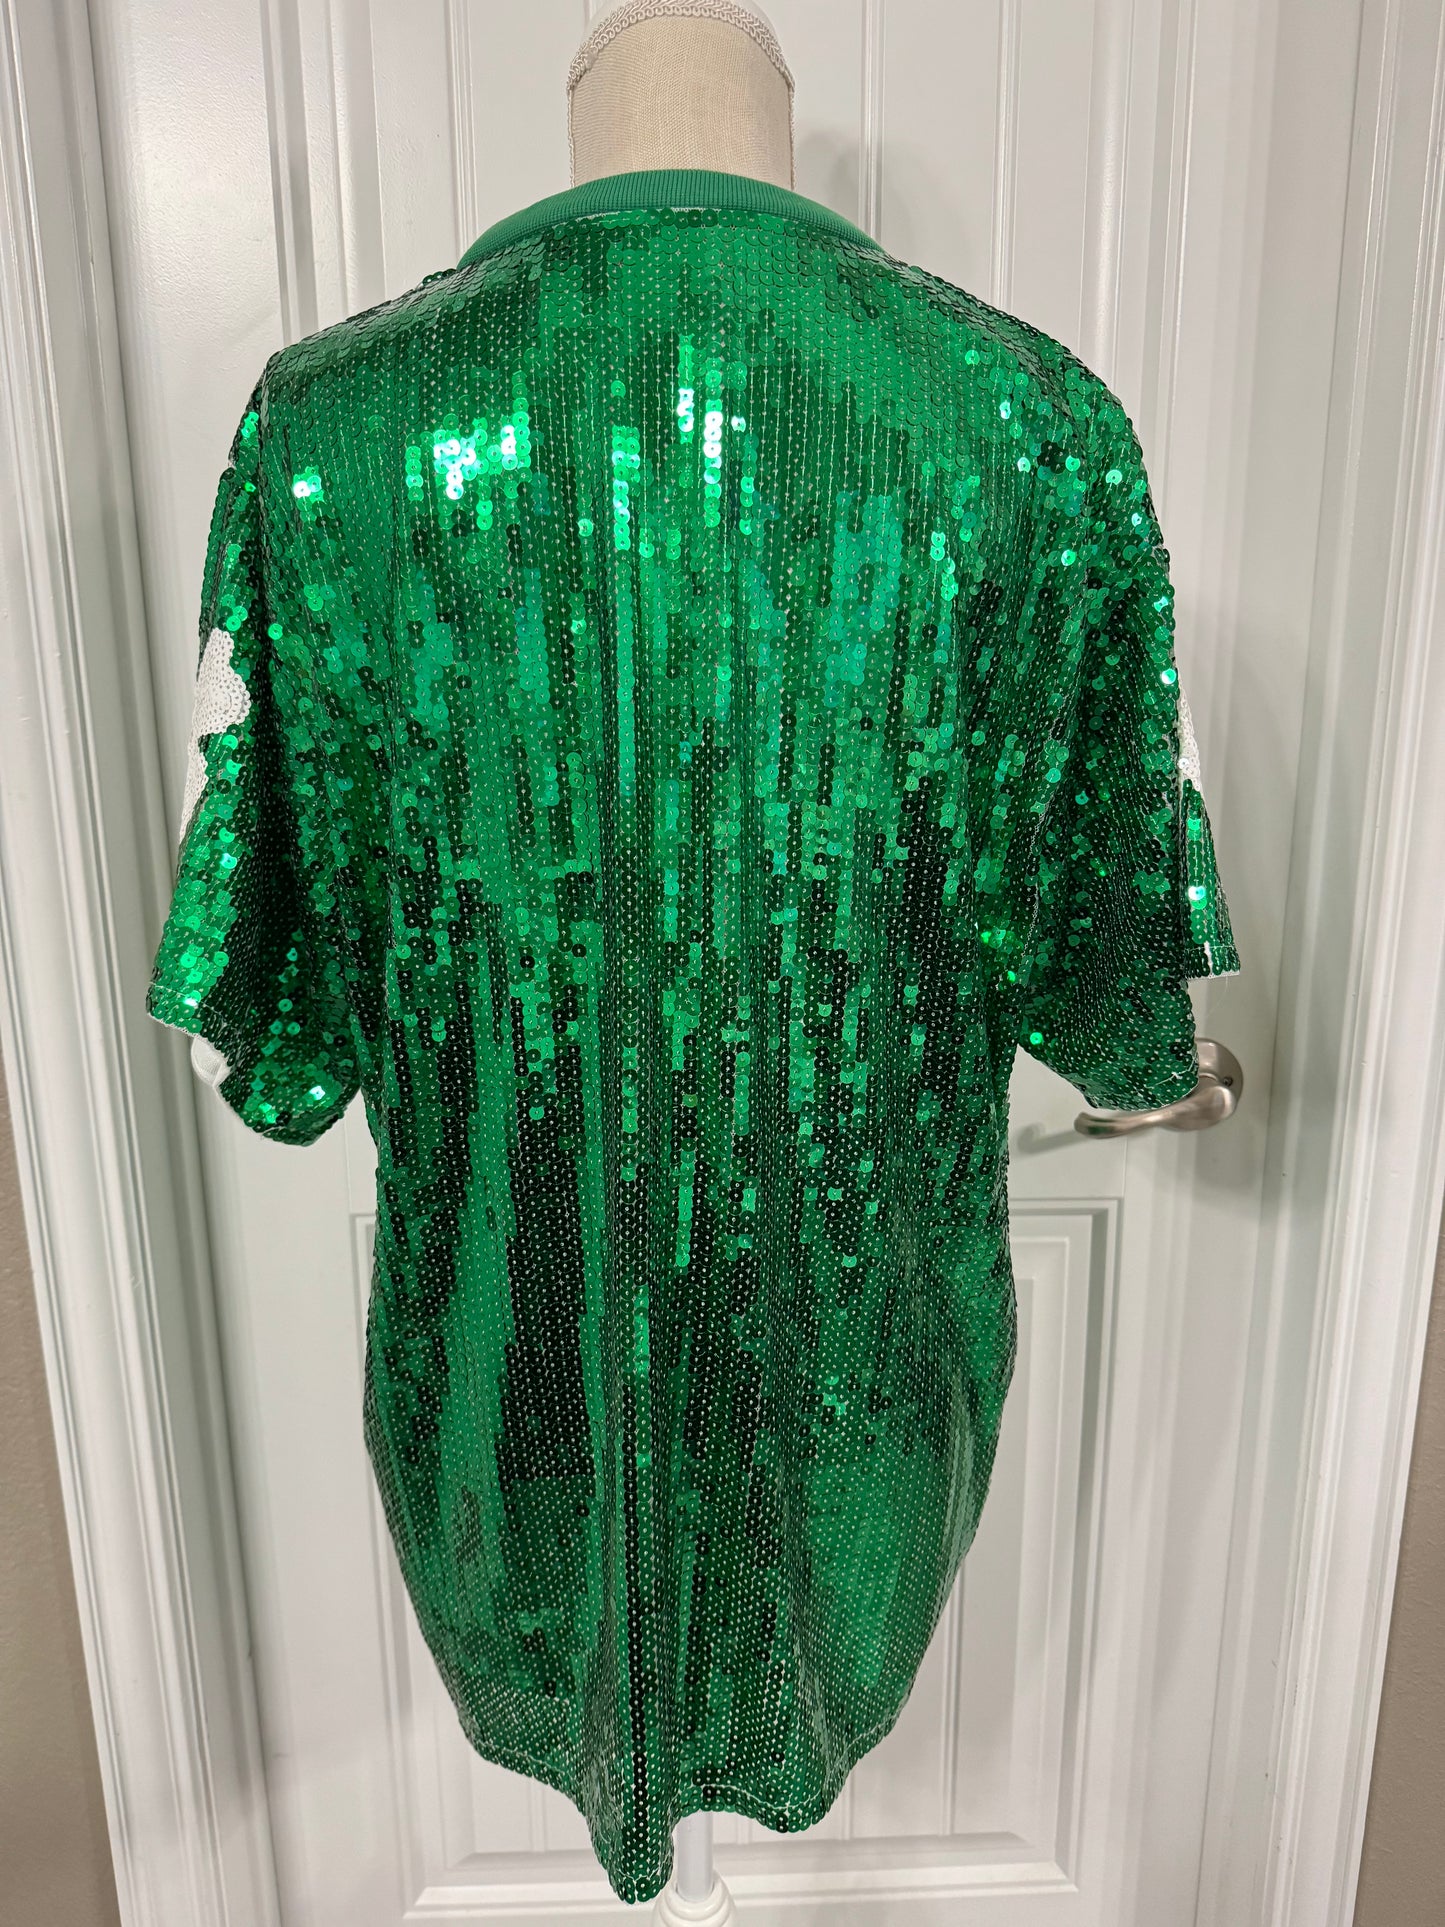 St. Patrick's Day Sequin Shirt for Women, Lucky, St Pattys